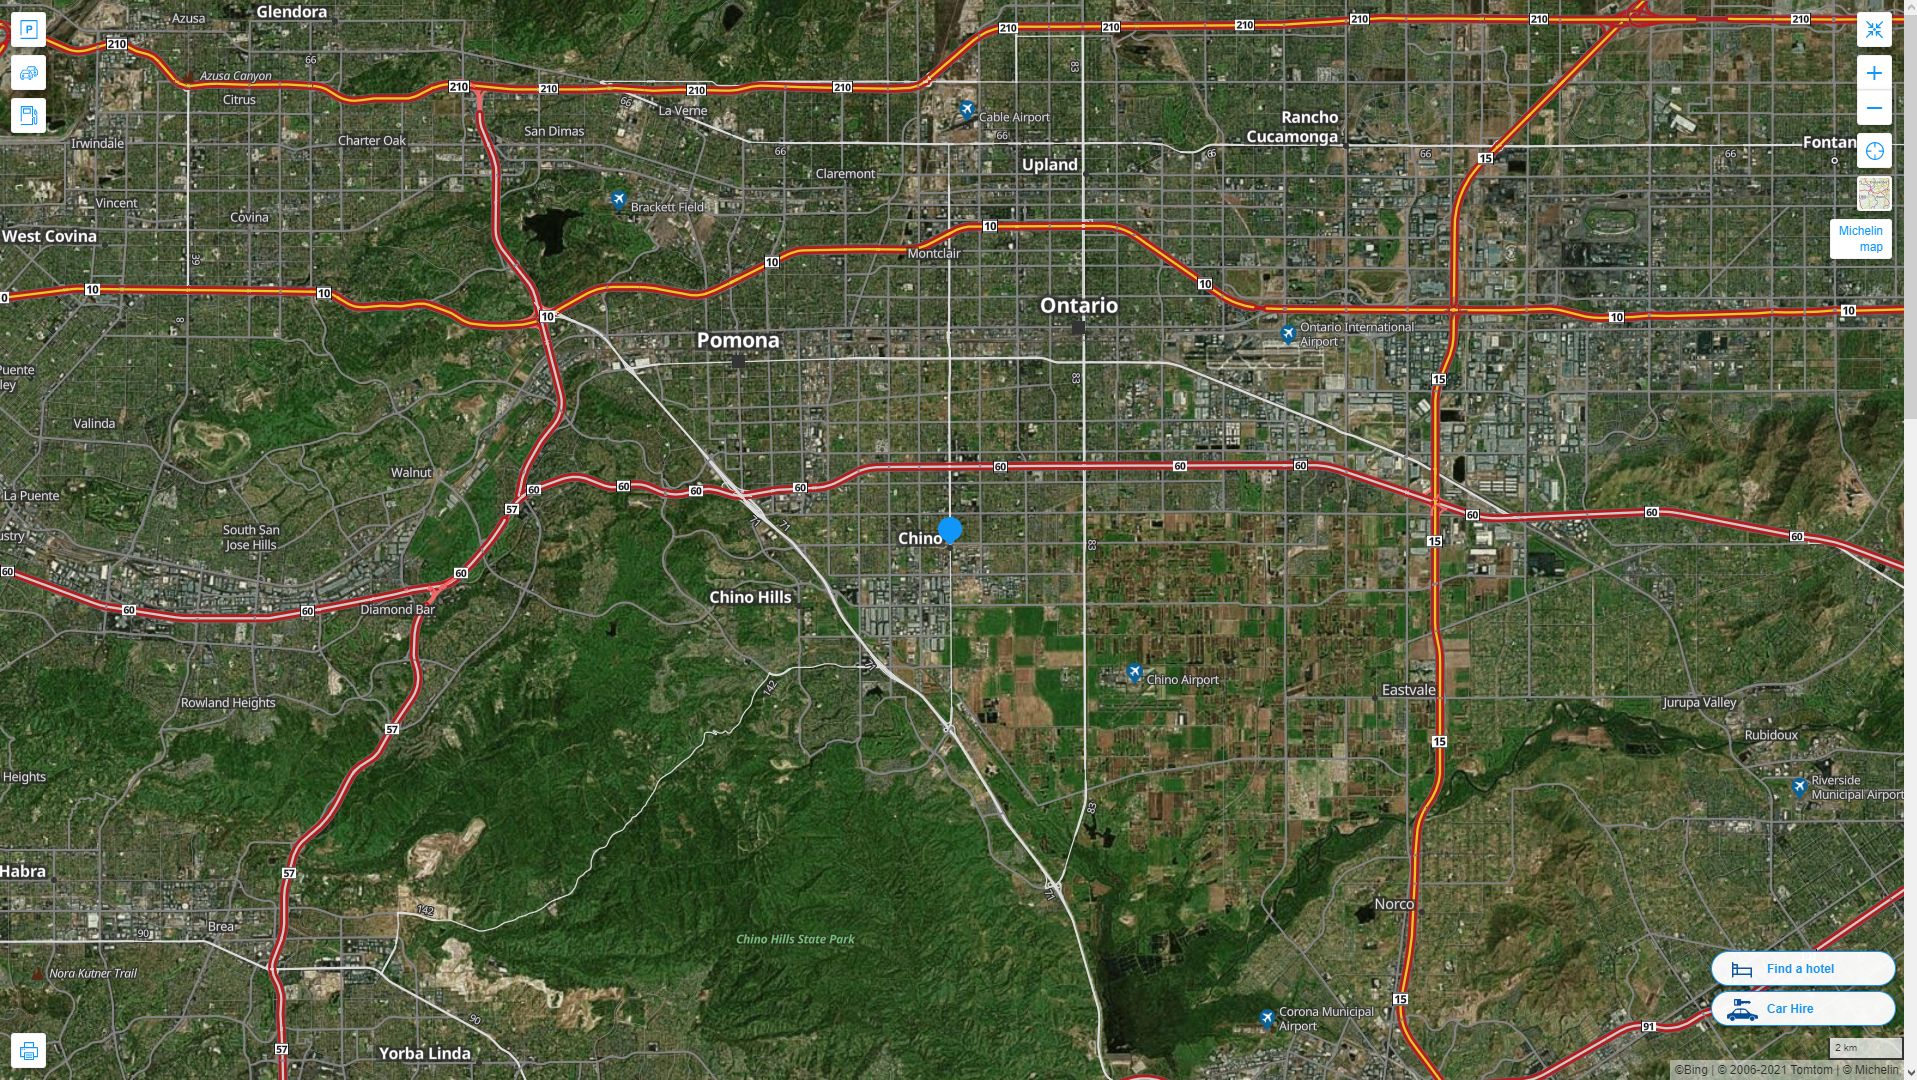 Chino California Highway and Road Map with Satellite View